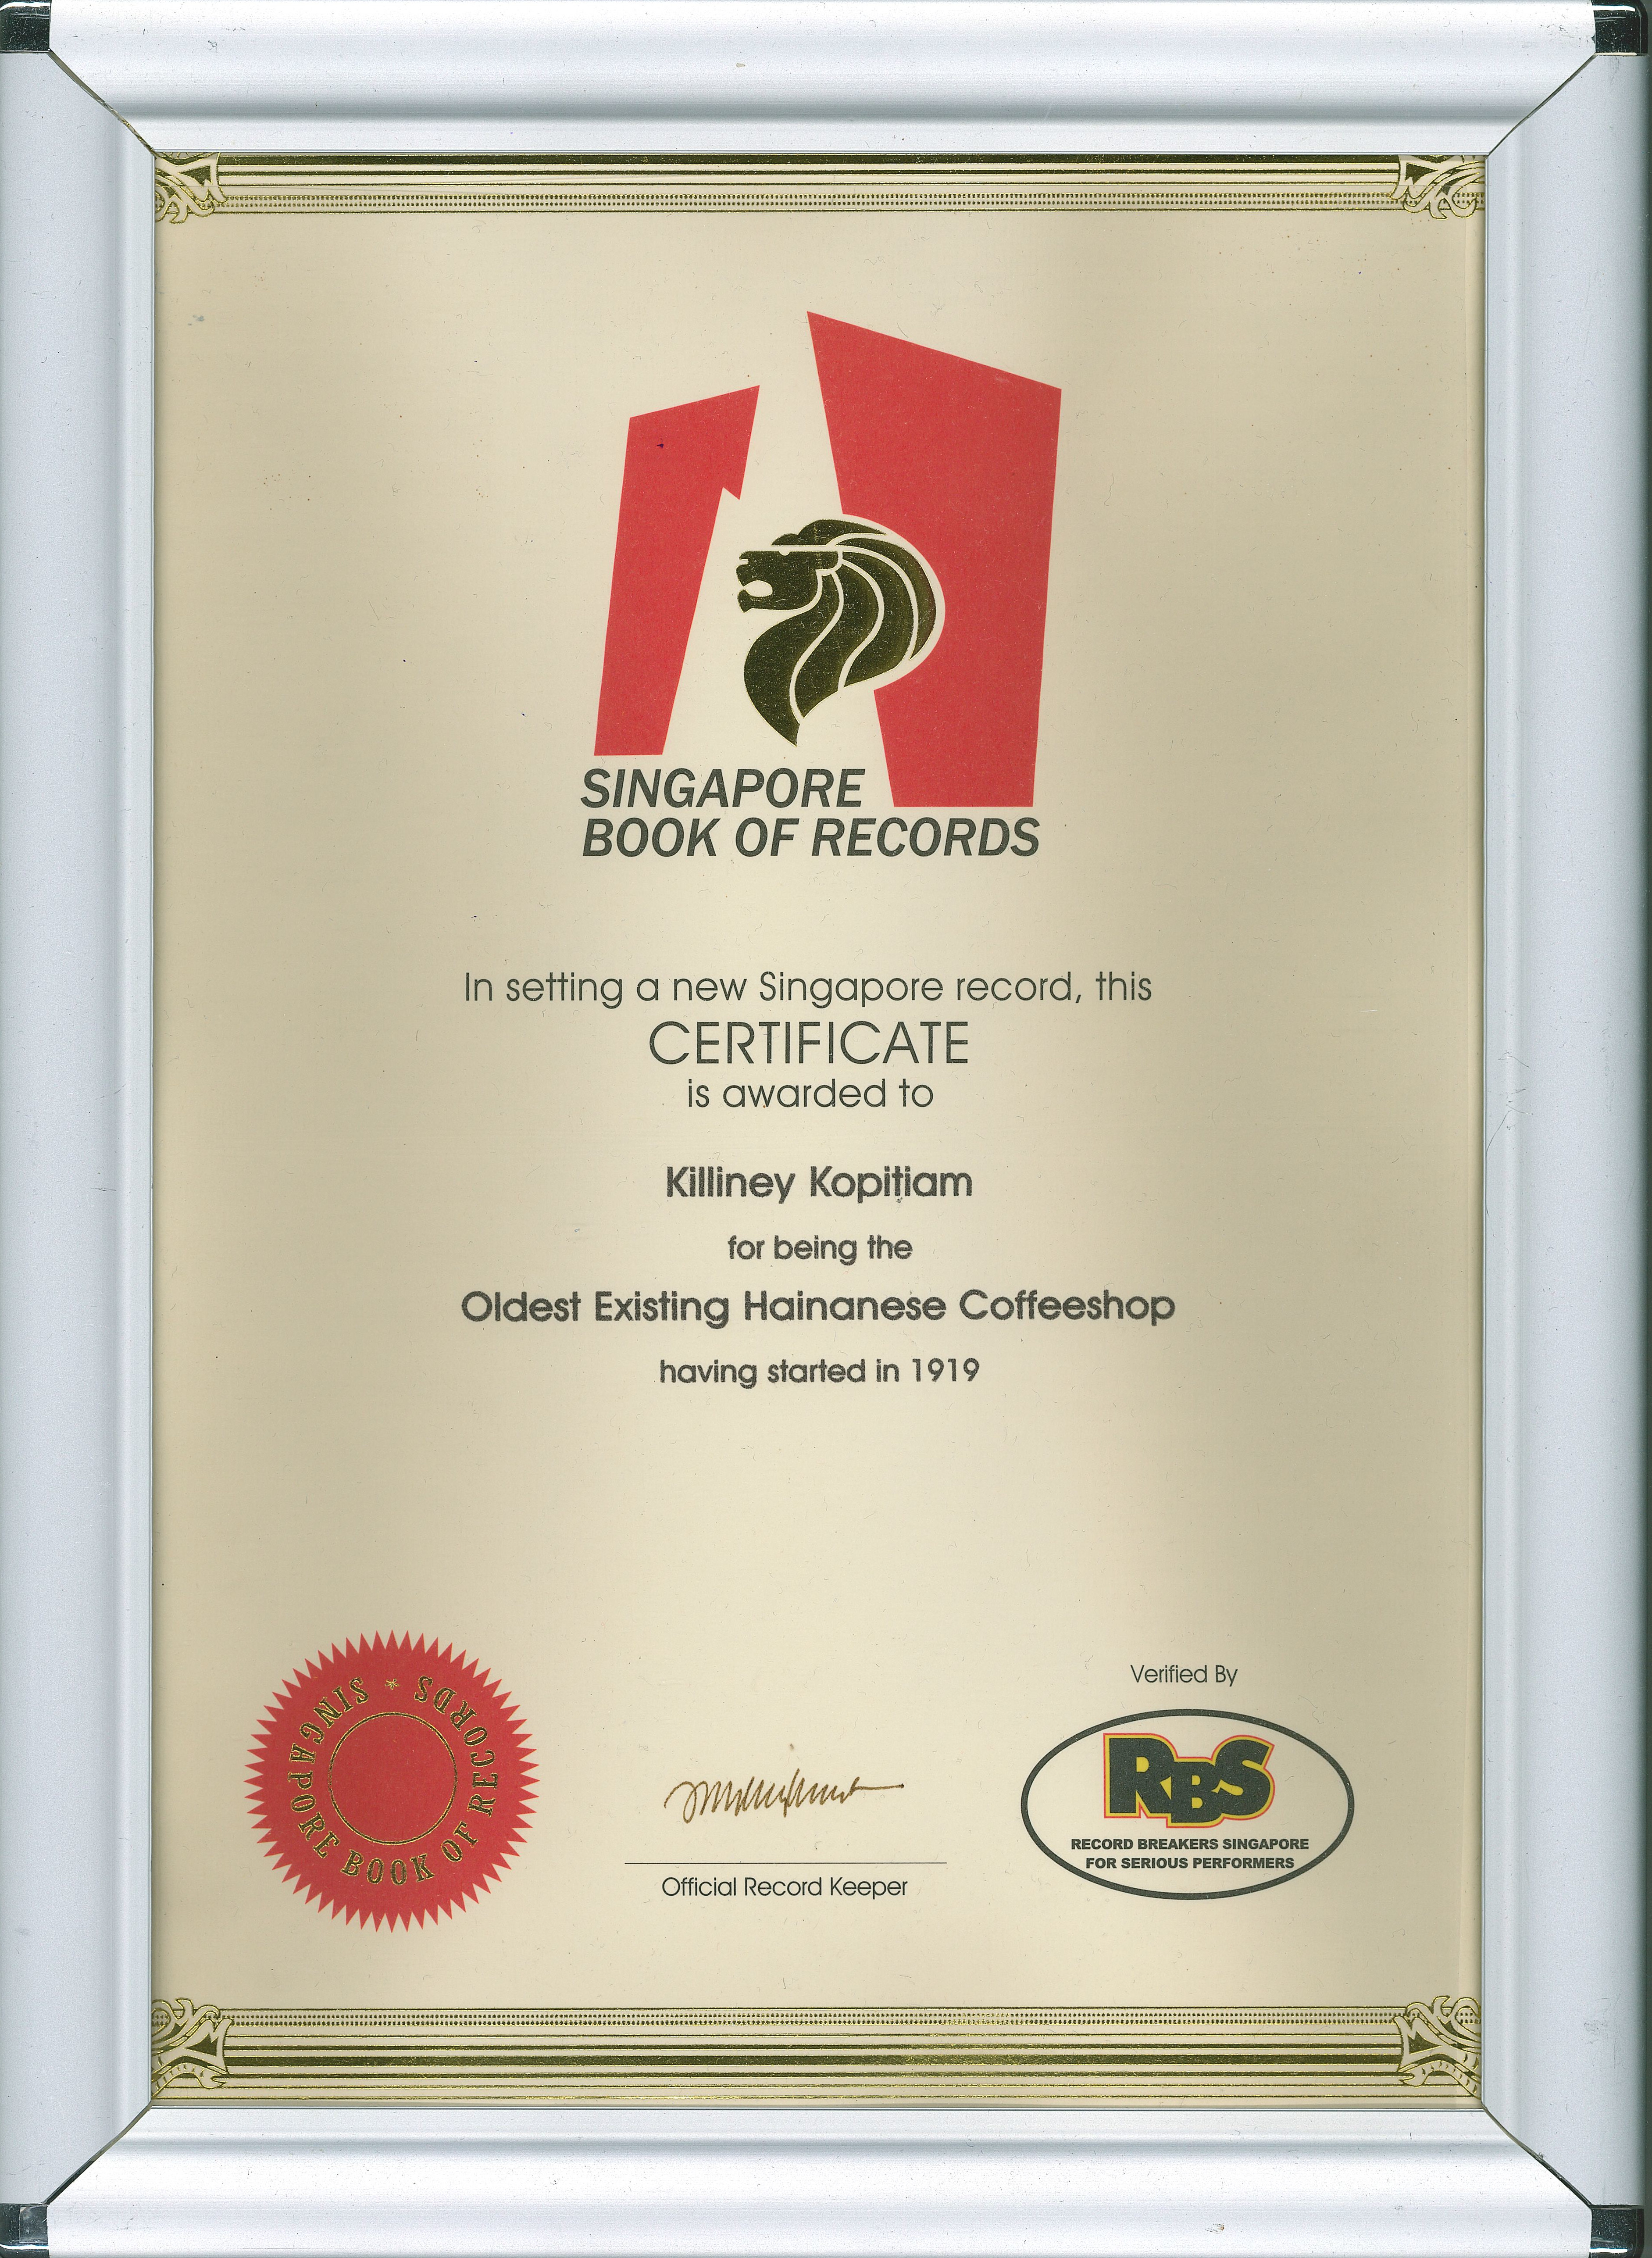 Singapore Book of Records Certificate